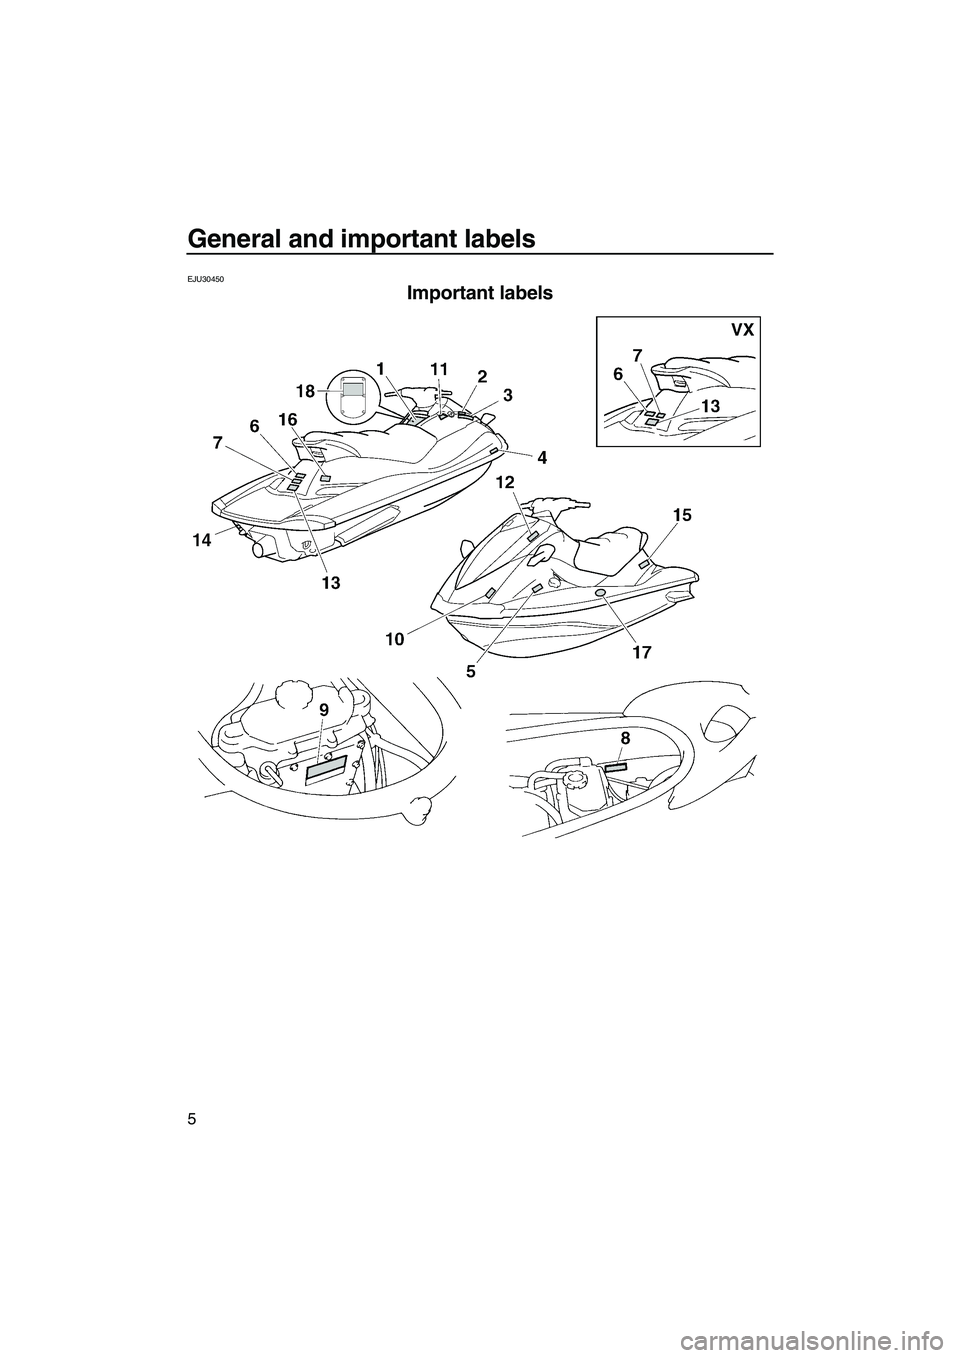 YAMAHA VX SPORT 2007 User Guide General and important labels
5
EJU30450
Important labels 
UF1K72E0.book  Page 5  Wednesday, August 2, 2006  10:43 AM 